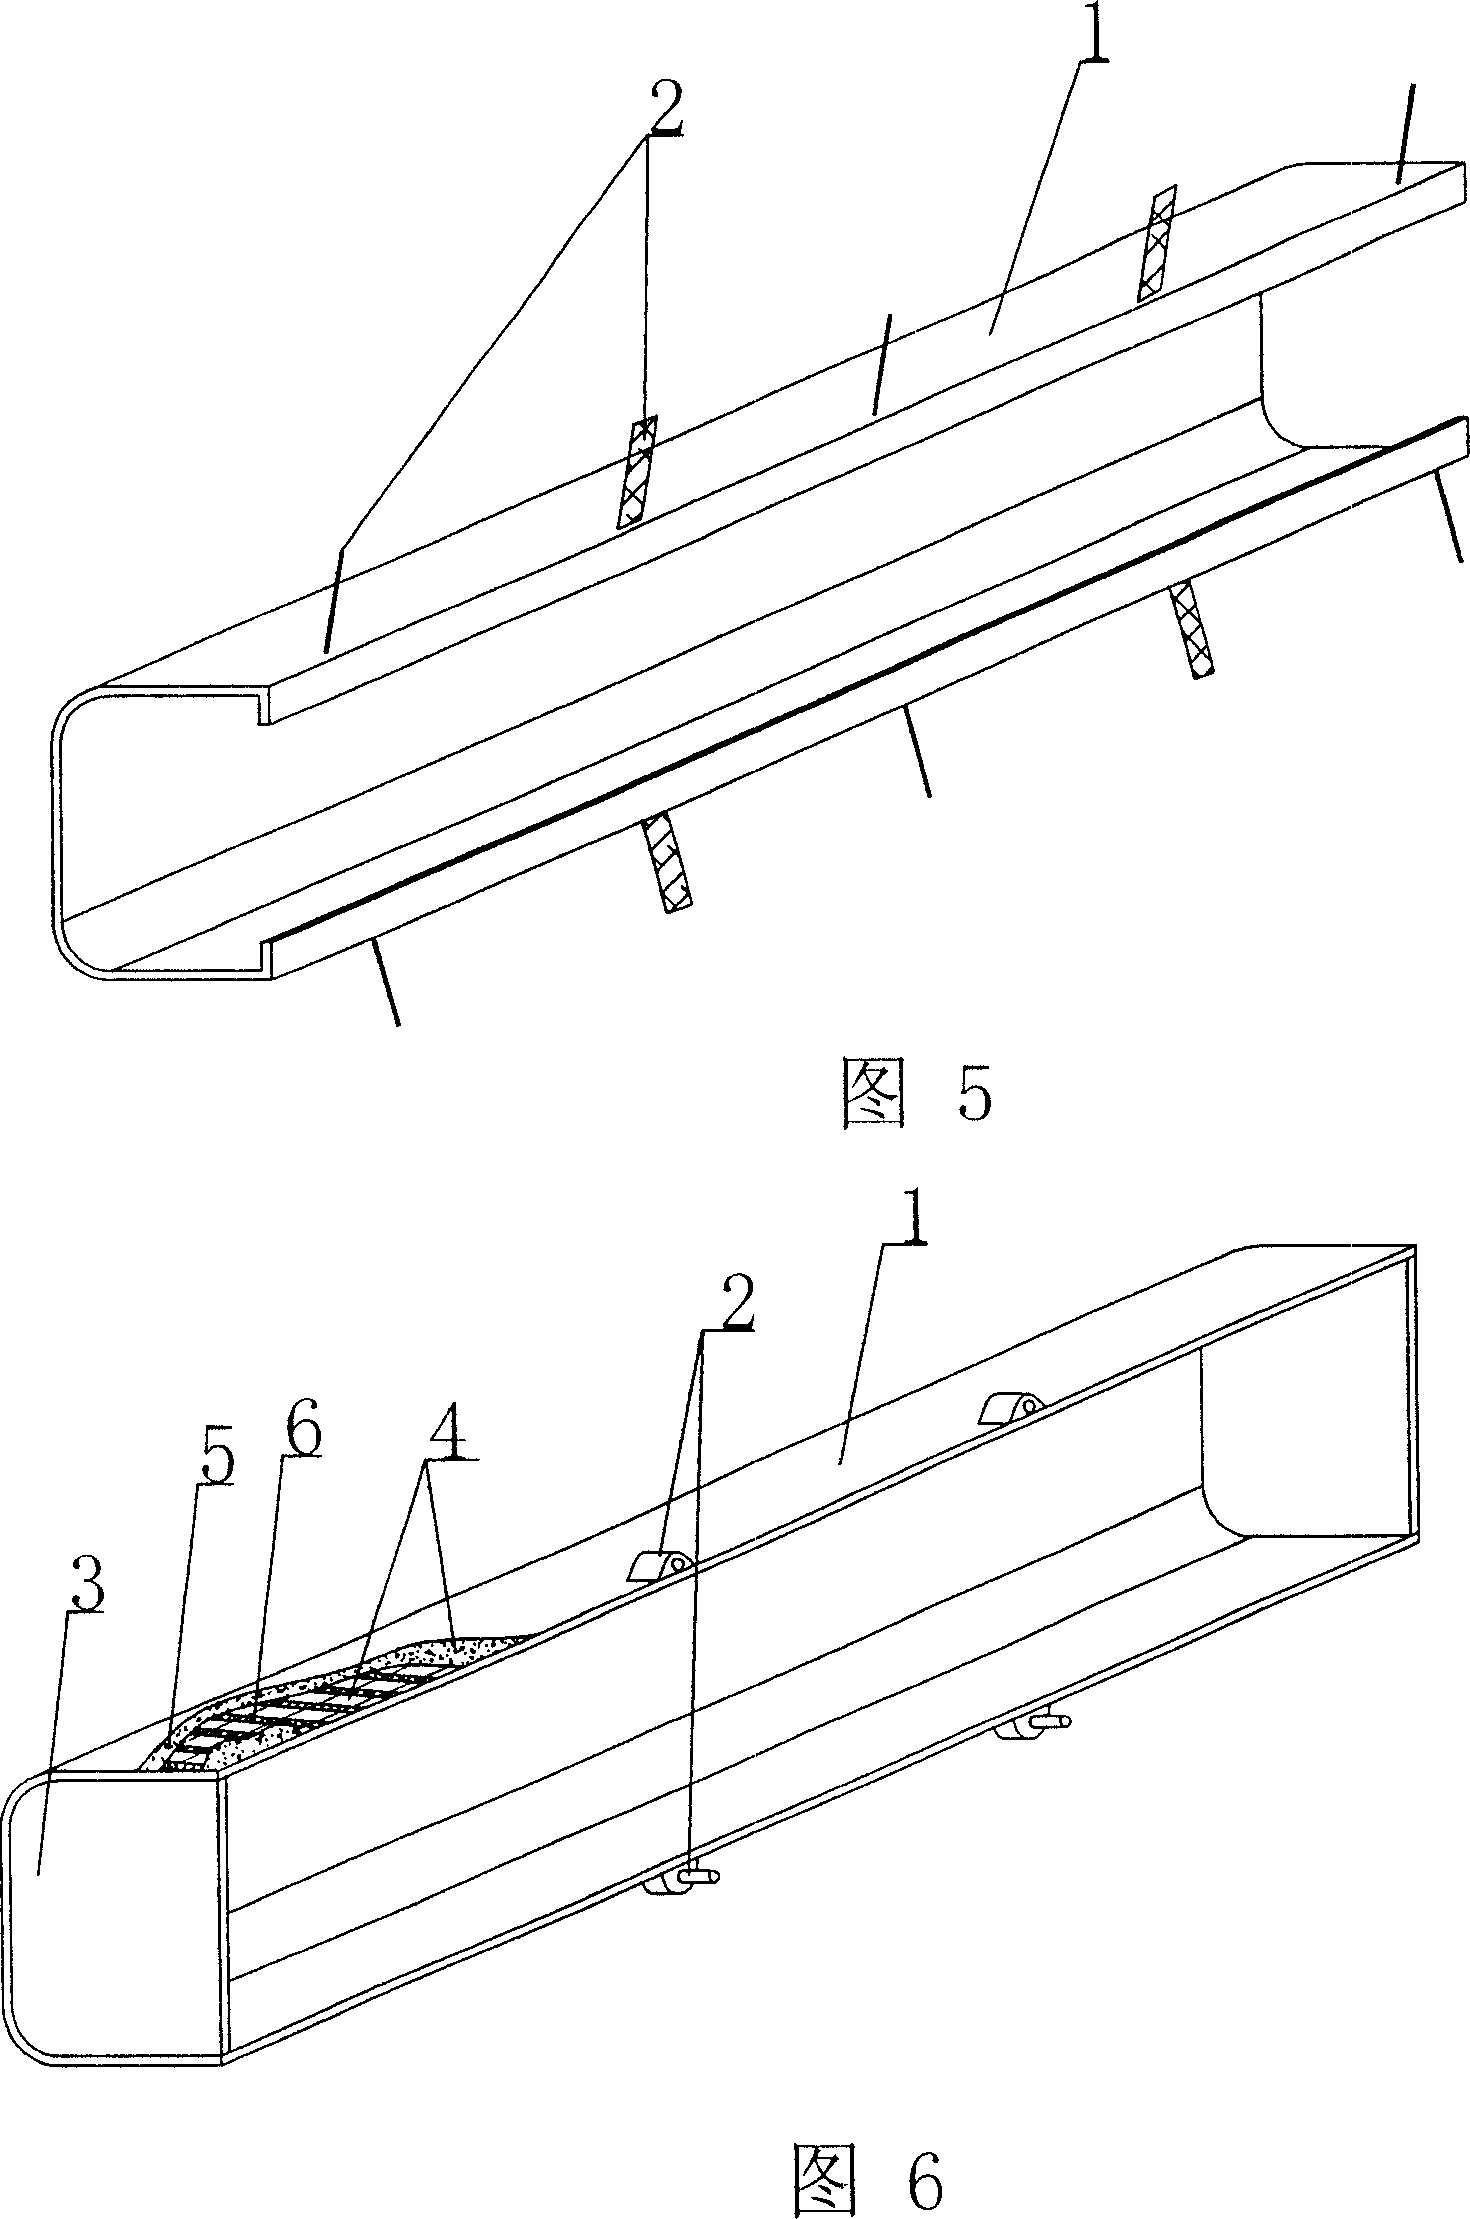 Perforating structural component for cast-in-situs reinforcing-bar concrete